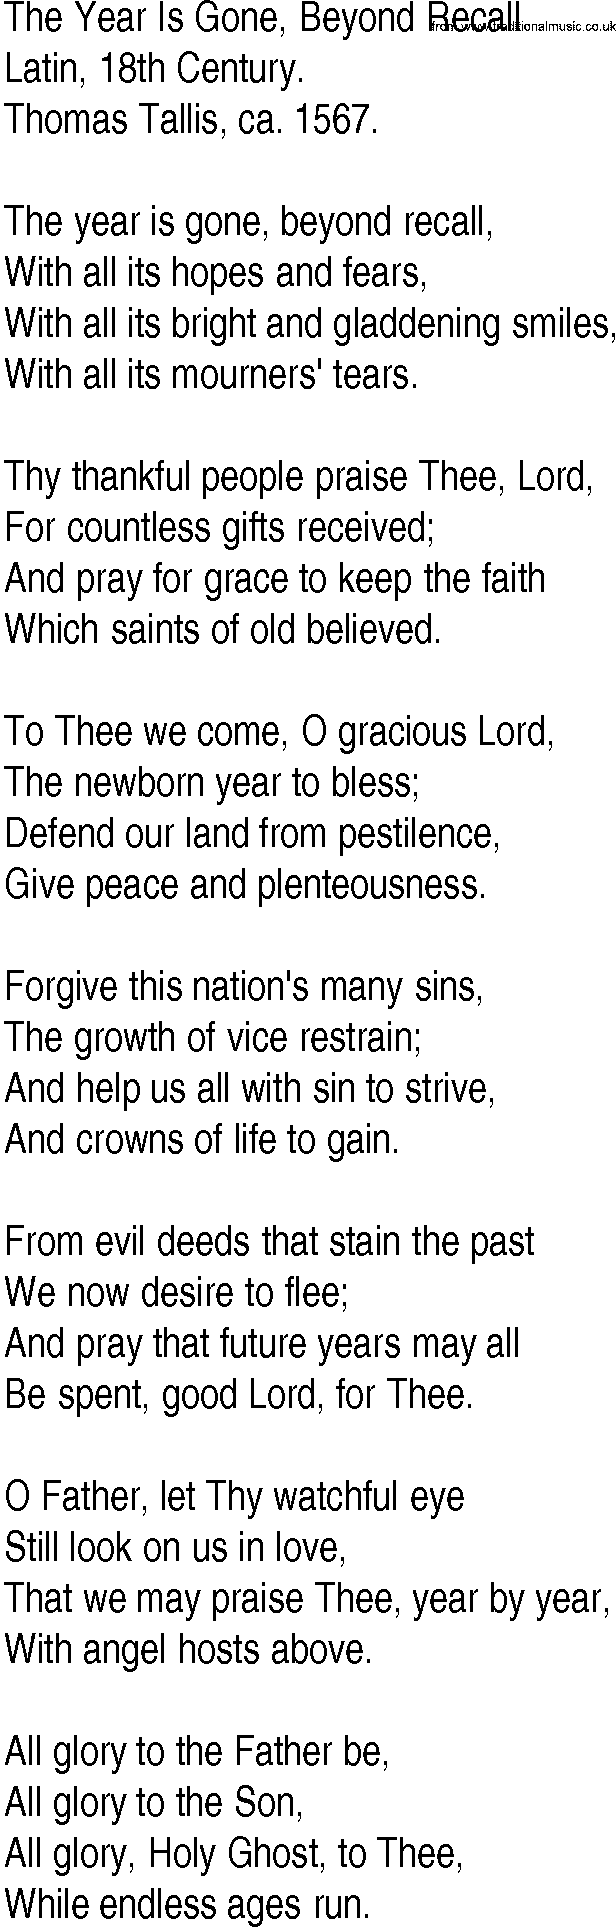 Hymn and Gospel Song: The Year Is Gone, Beyond Recall by Latin th Century lyrics